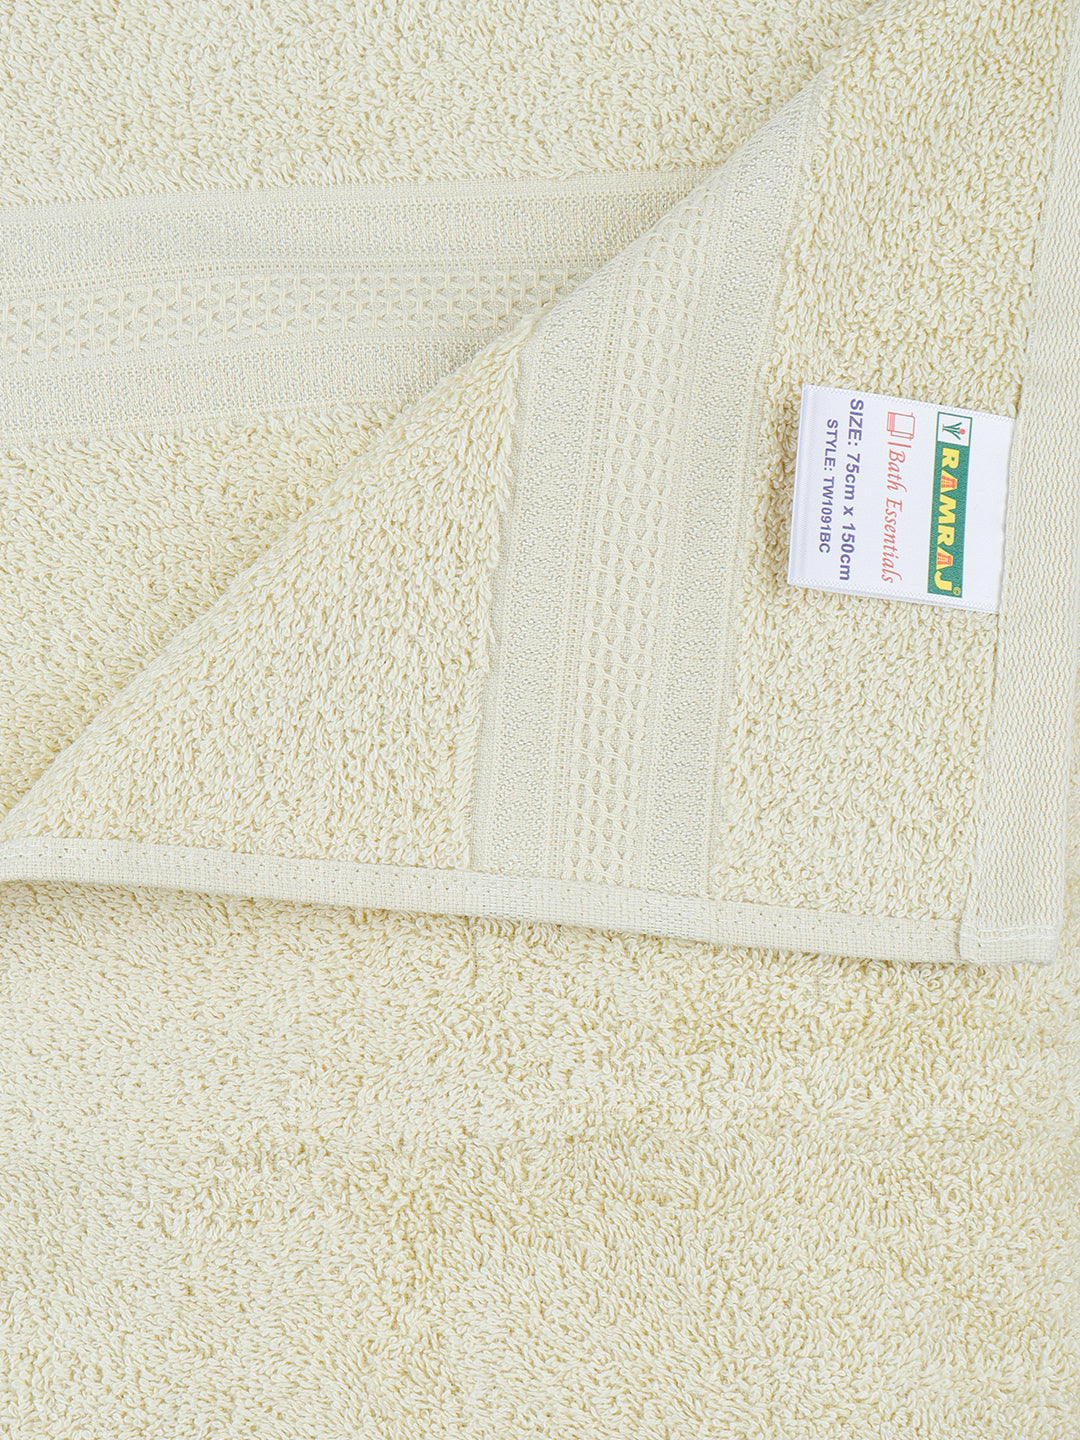 Premium Soft & Absorbent Cotton Bamboo Light Yellow Terry Bath Towel BC3-View one